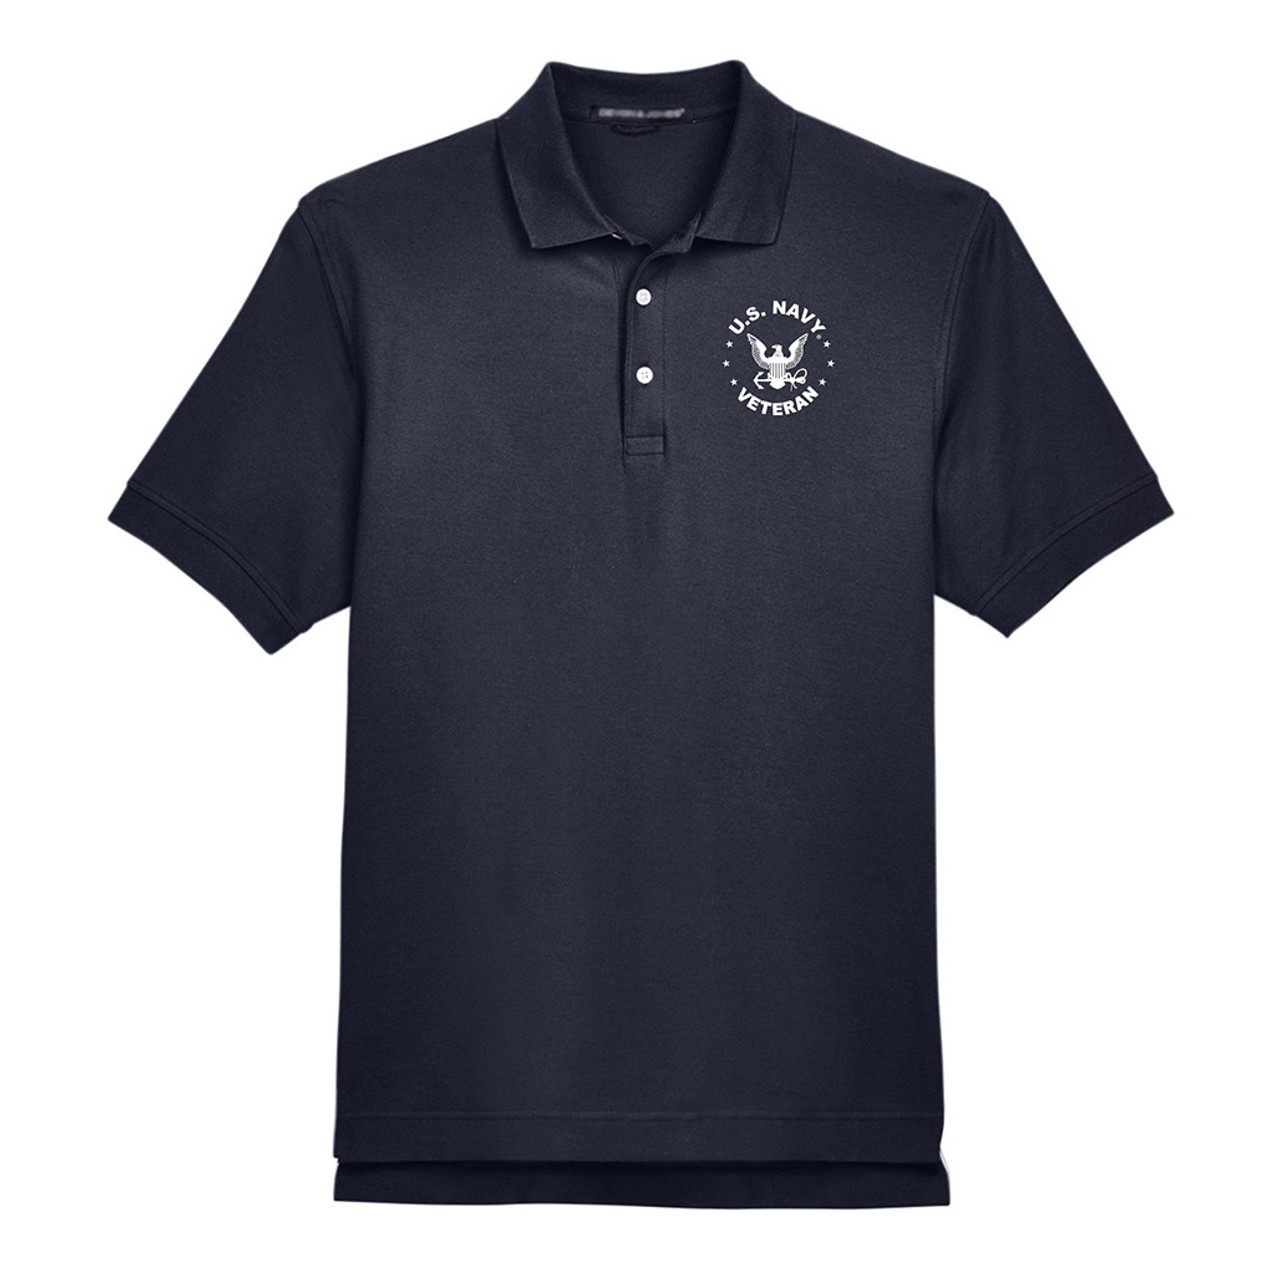 Officially Licensed U.S. Navy Eagle with Stars Veteran Polo: black polo with white embroidery